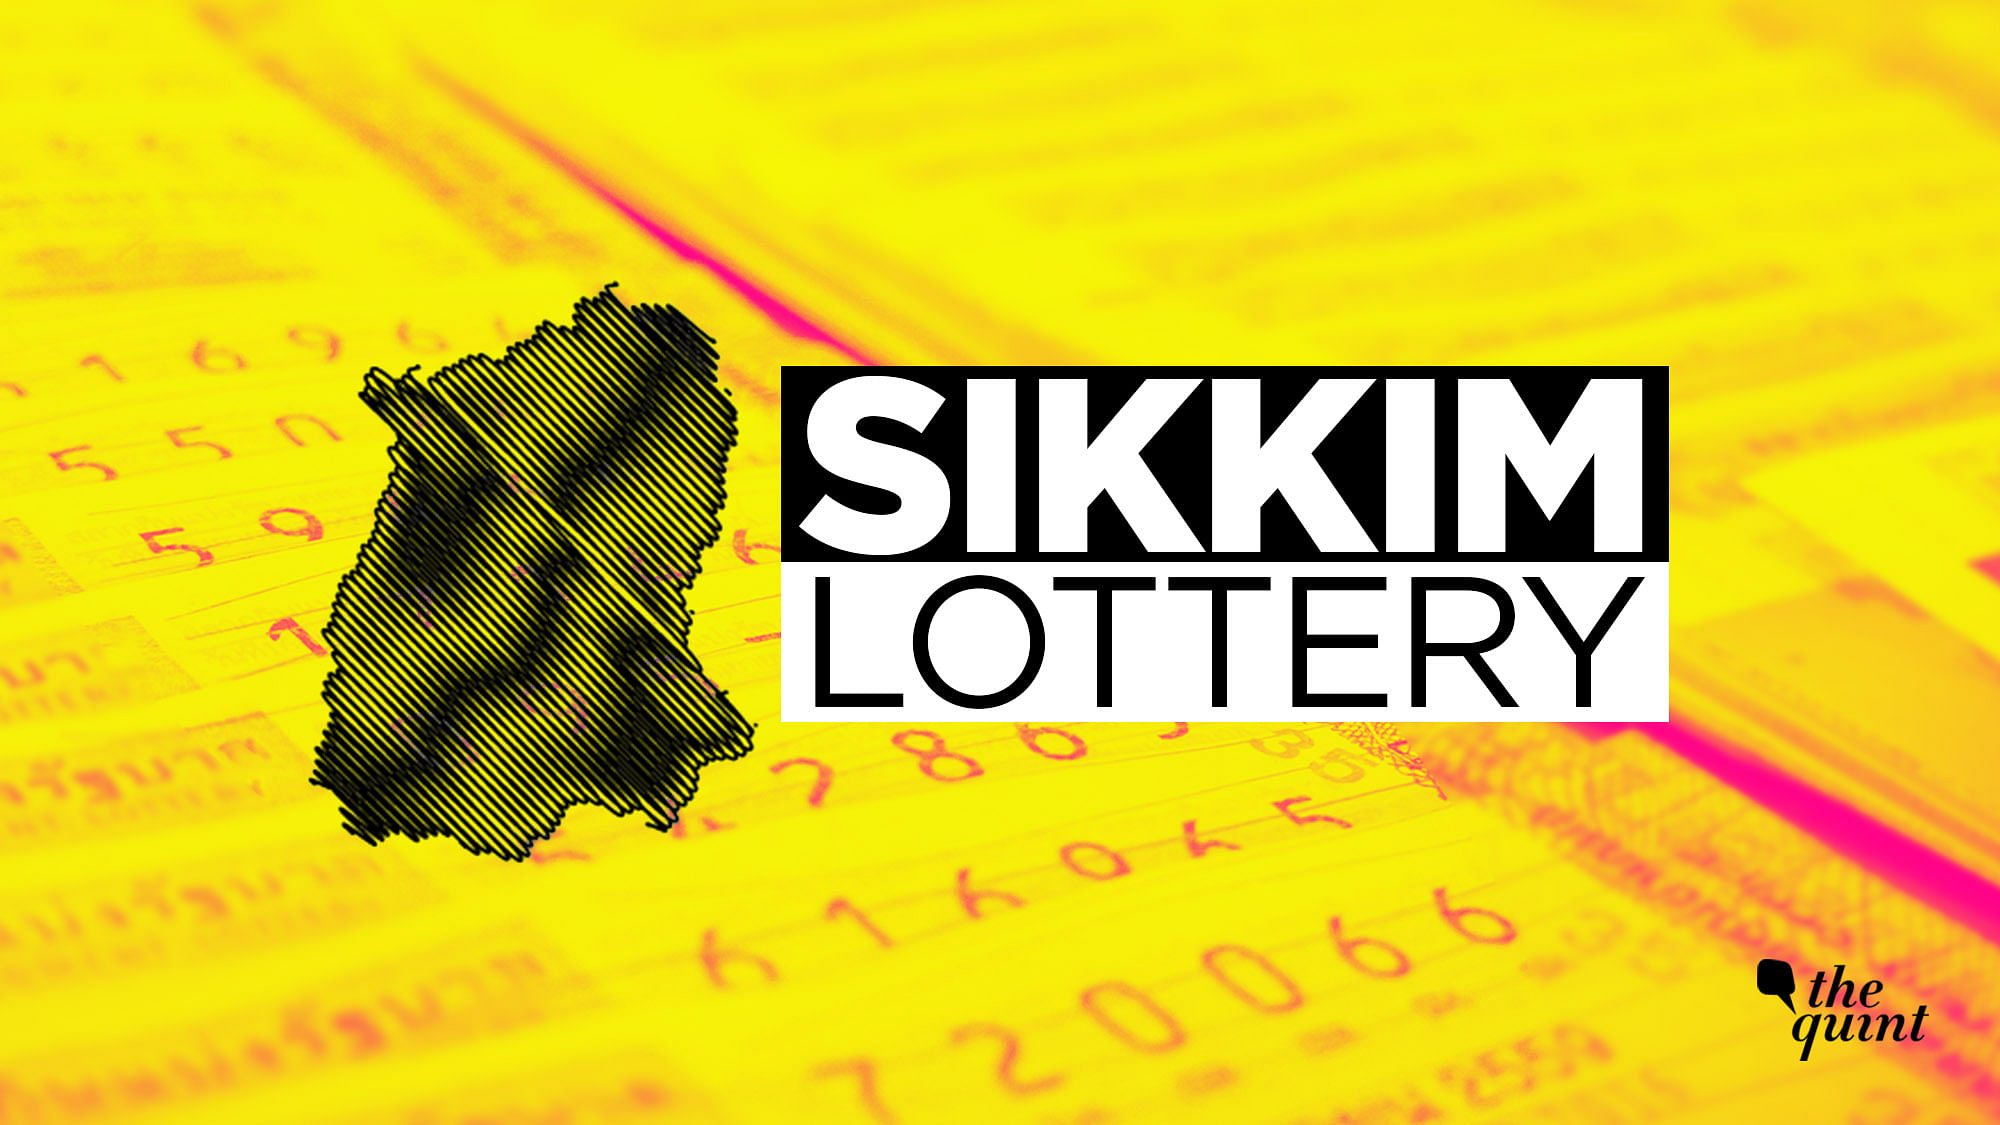 Lottery Sambad 03.10.2019 Result: The Sikkim lottery results will be declared at 11:55 AM today.